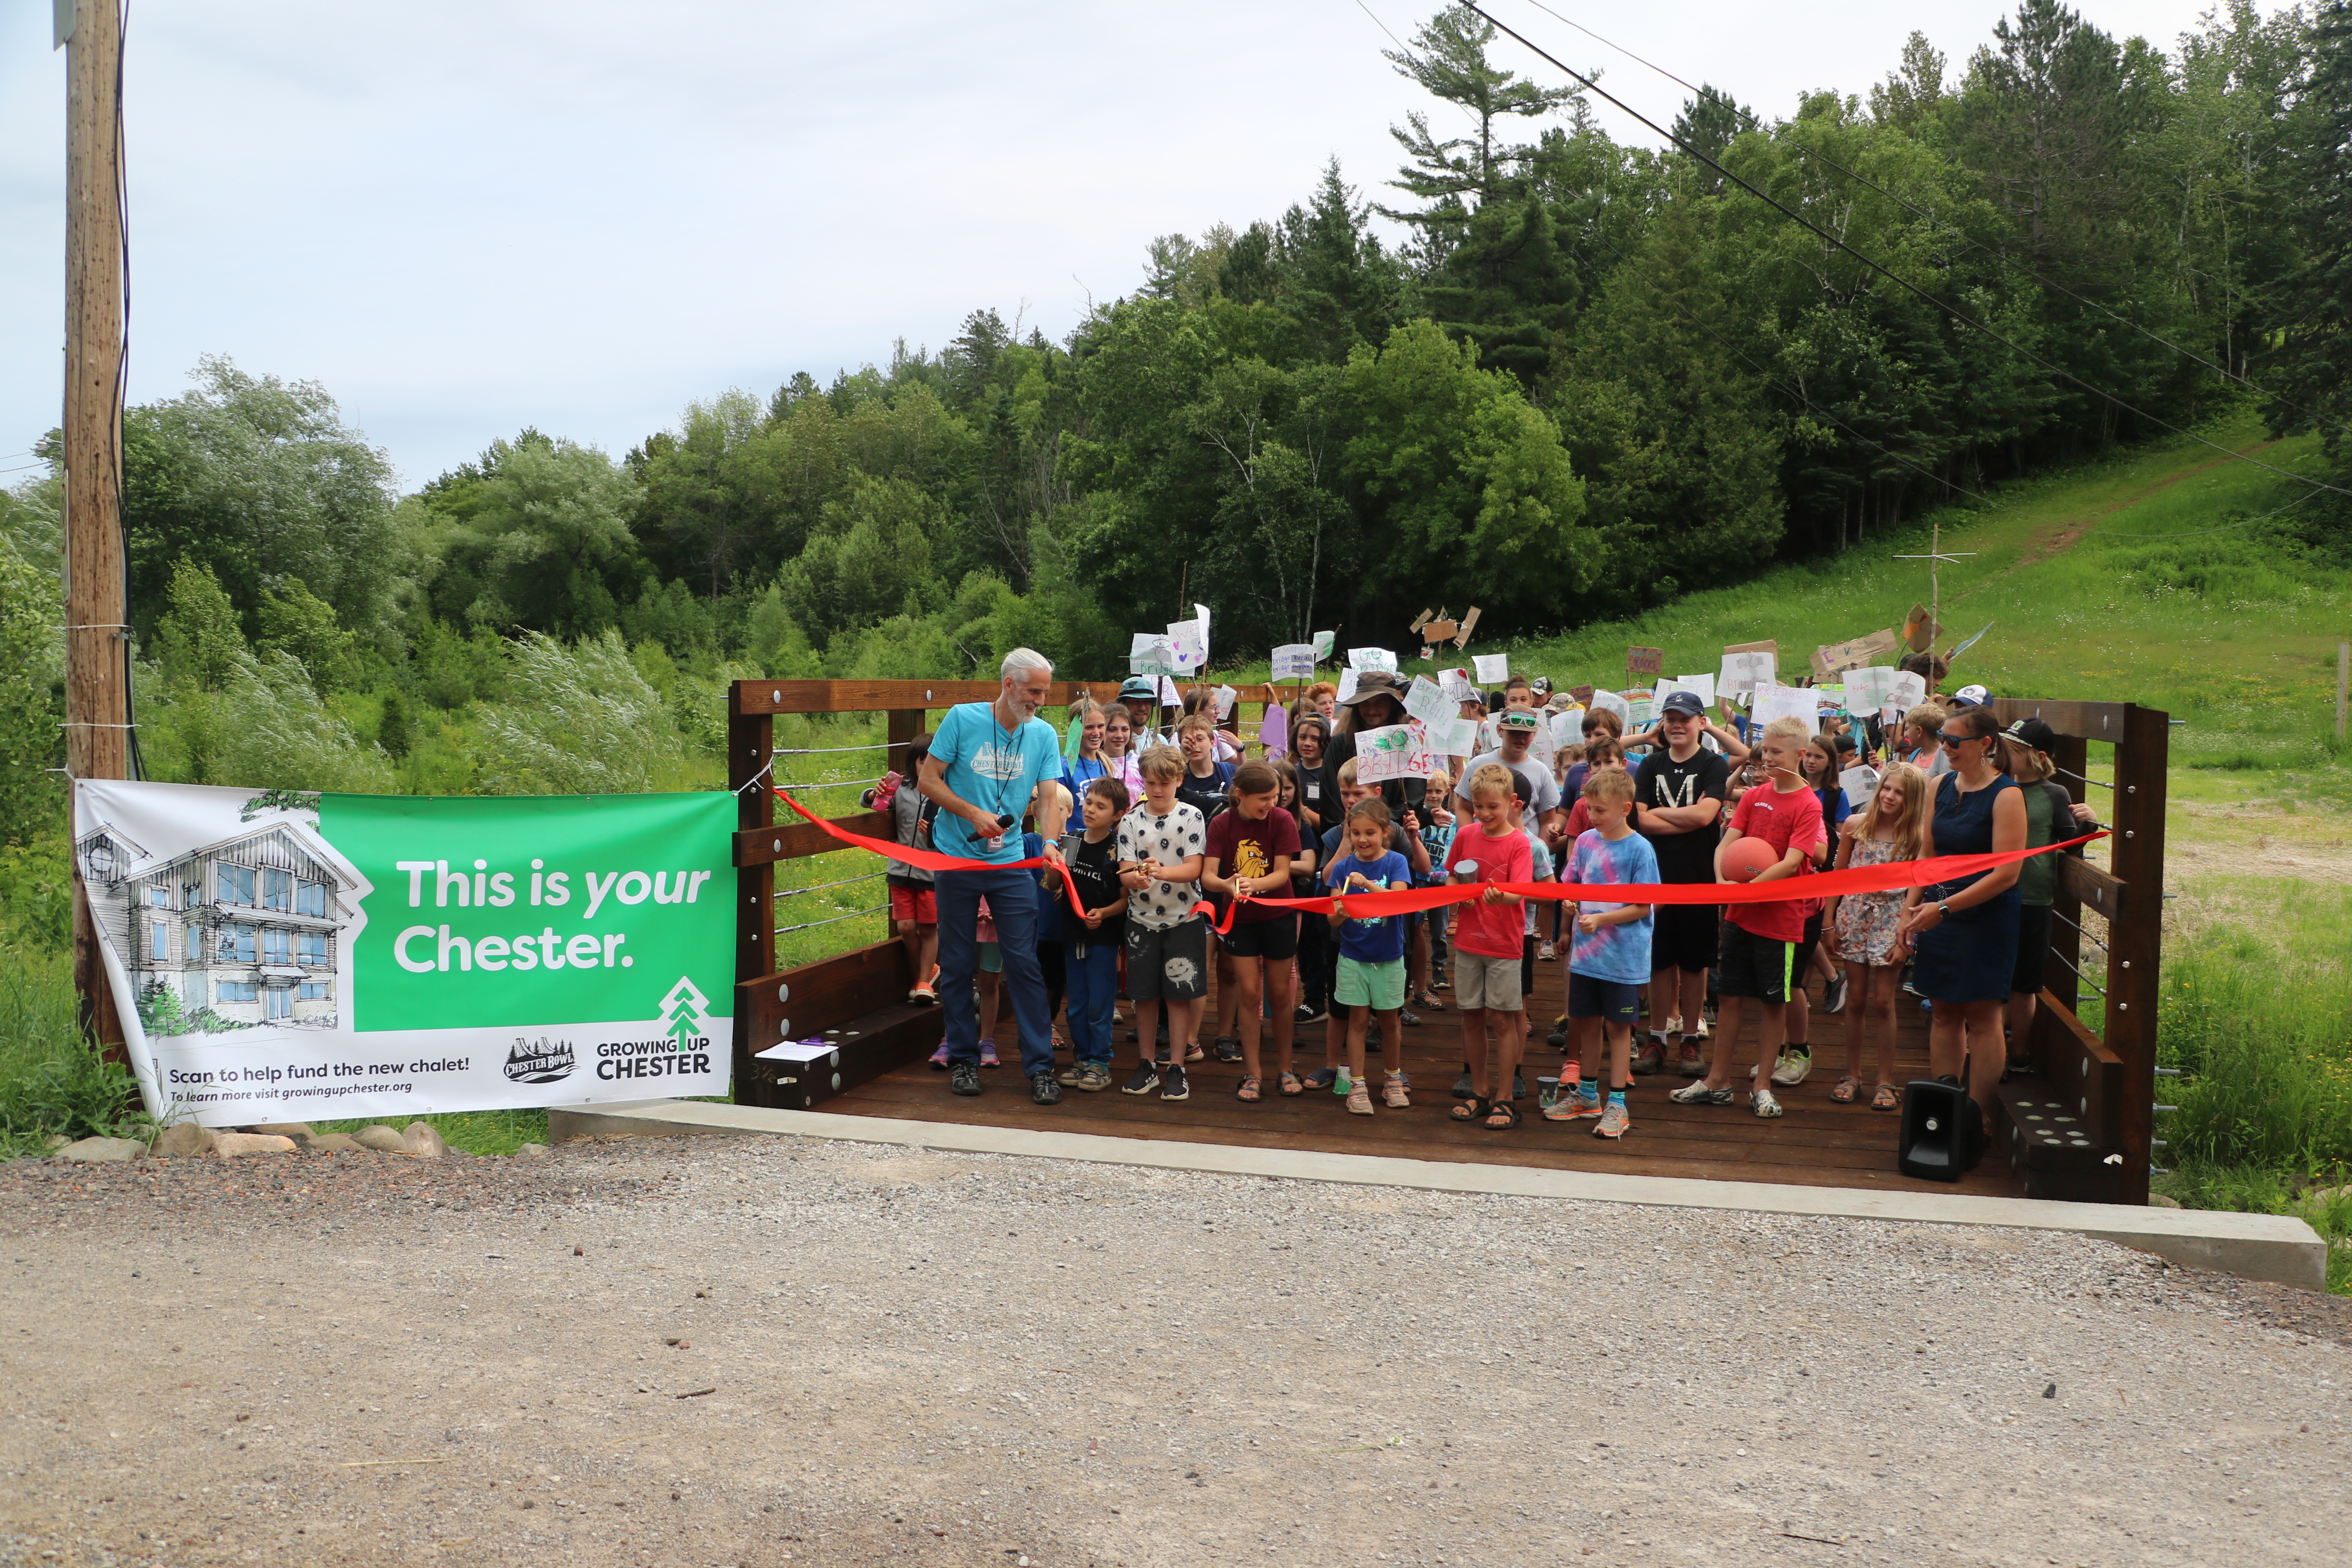 Photo from ribbon cutting event with a sign on left that says this is your Chester. There are one hundred kids on the bridge with five in front cutting a large red ribbon spanning the bridge. The background is lush and green and the kids are excited.